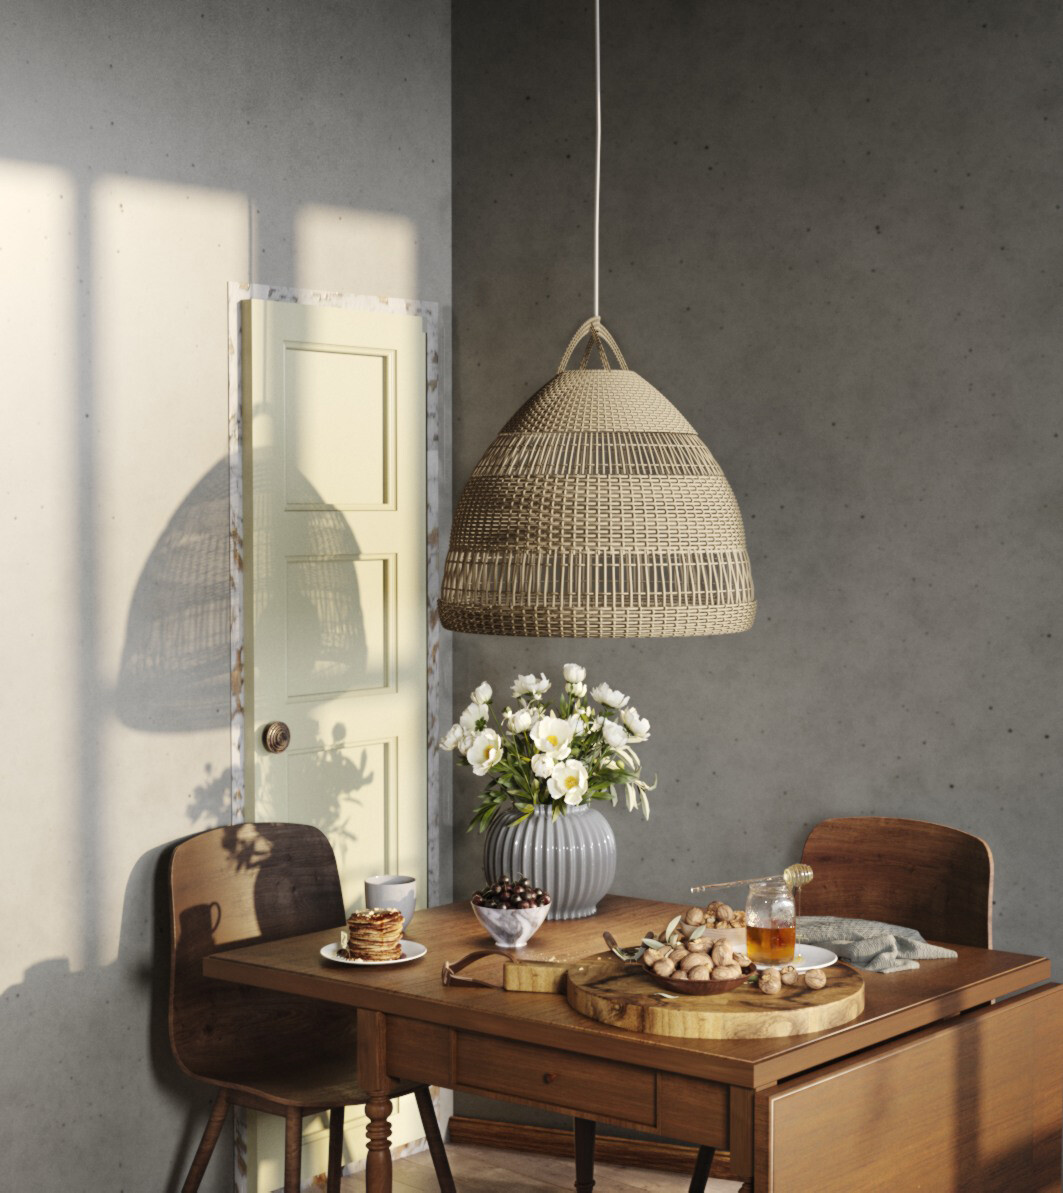 ArtStation - Table with Decor and Wicker Lamp